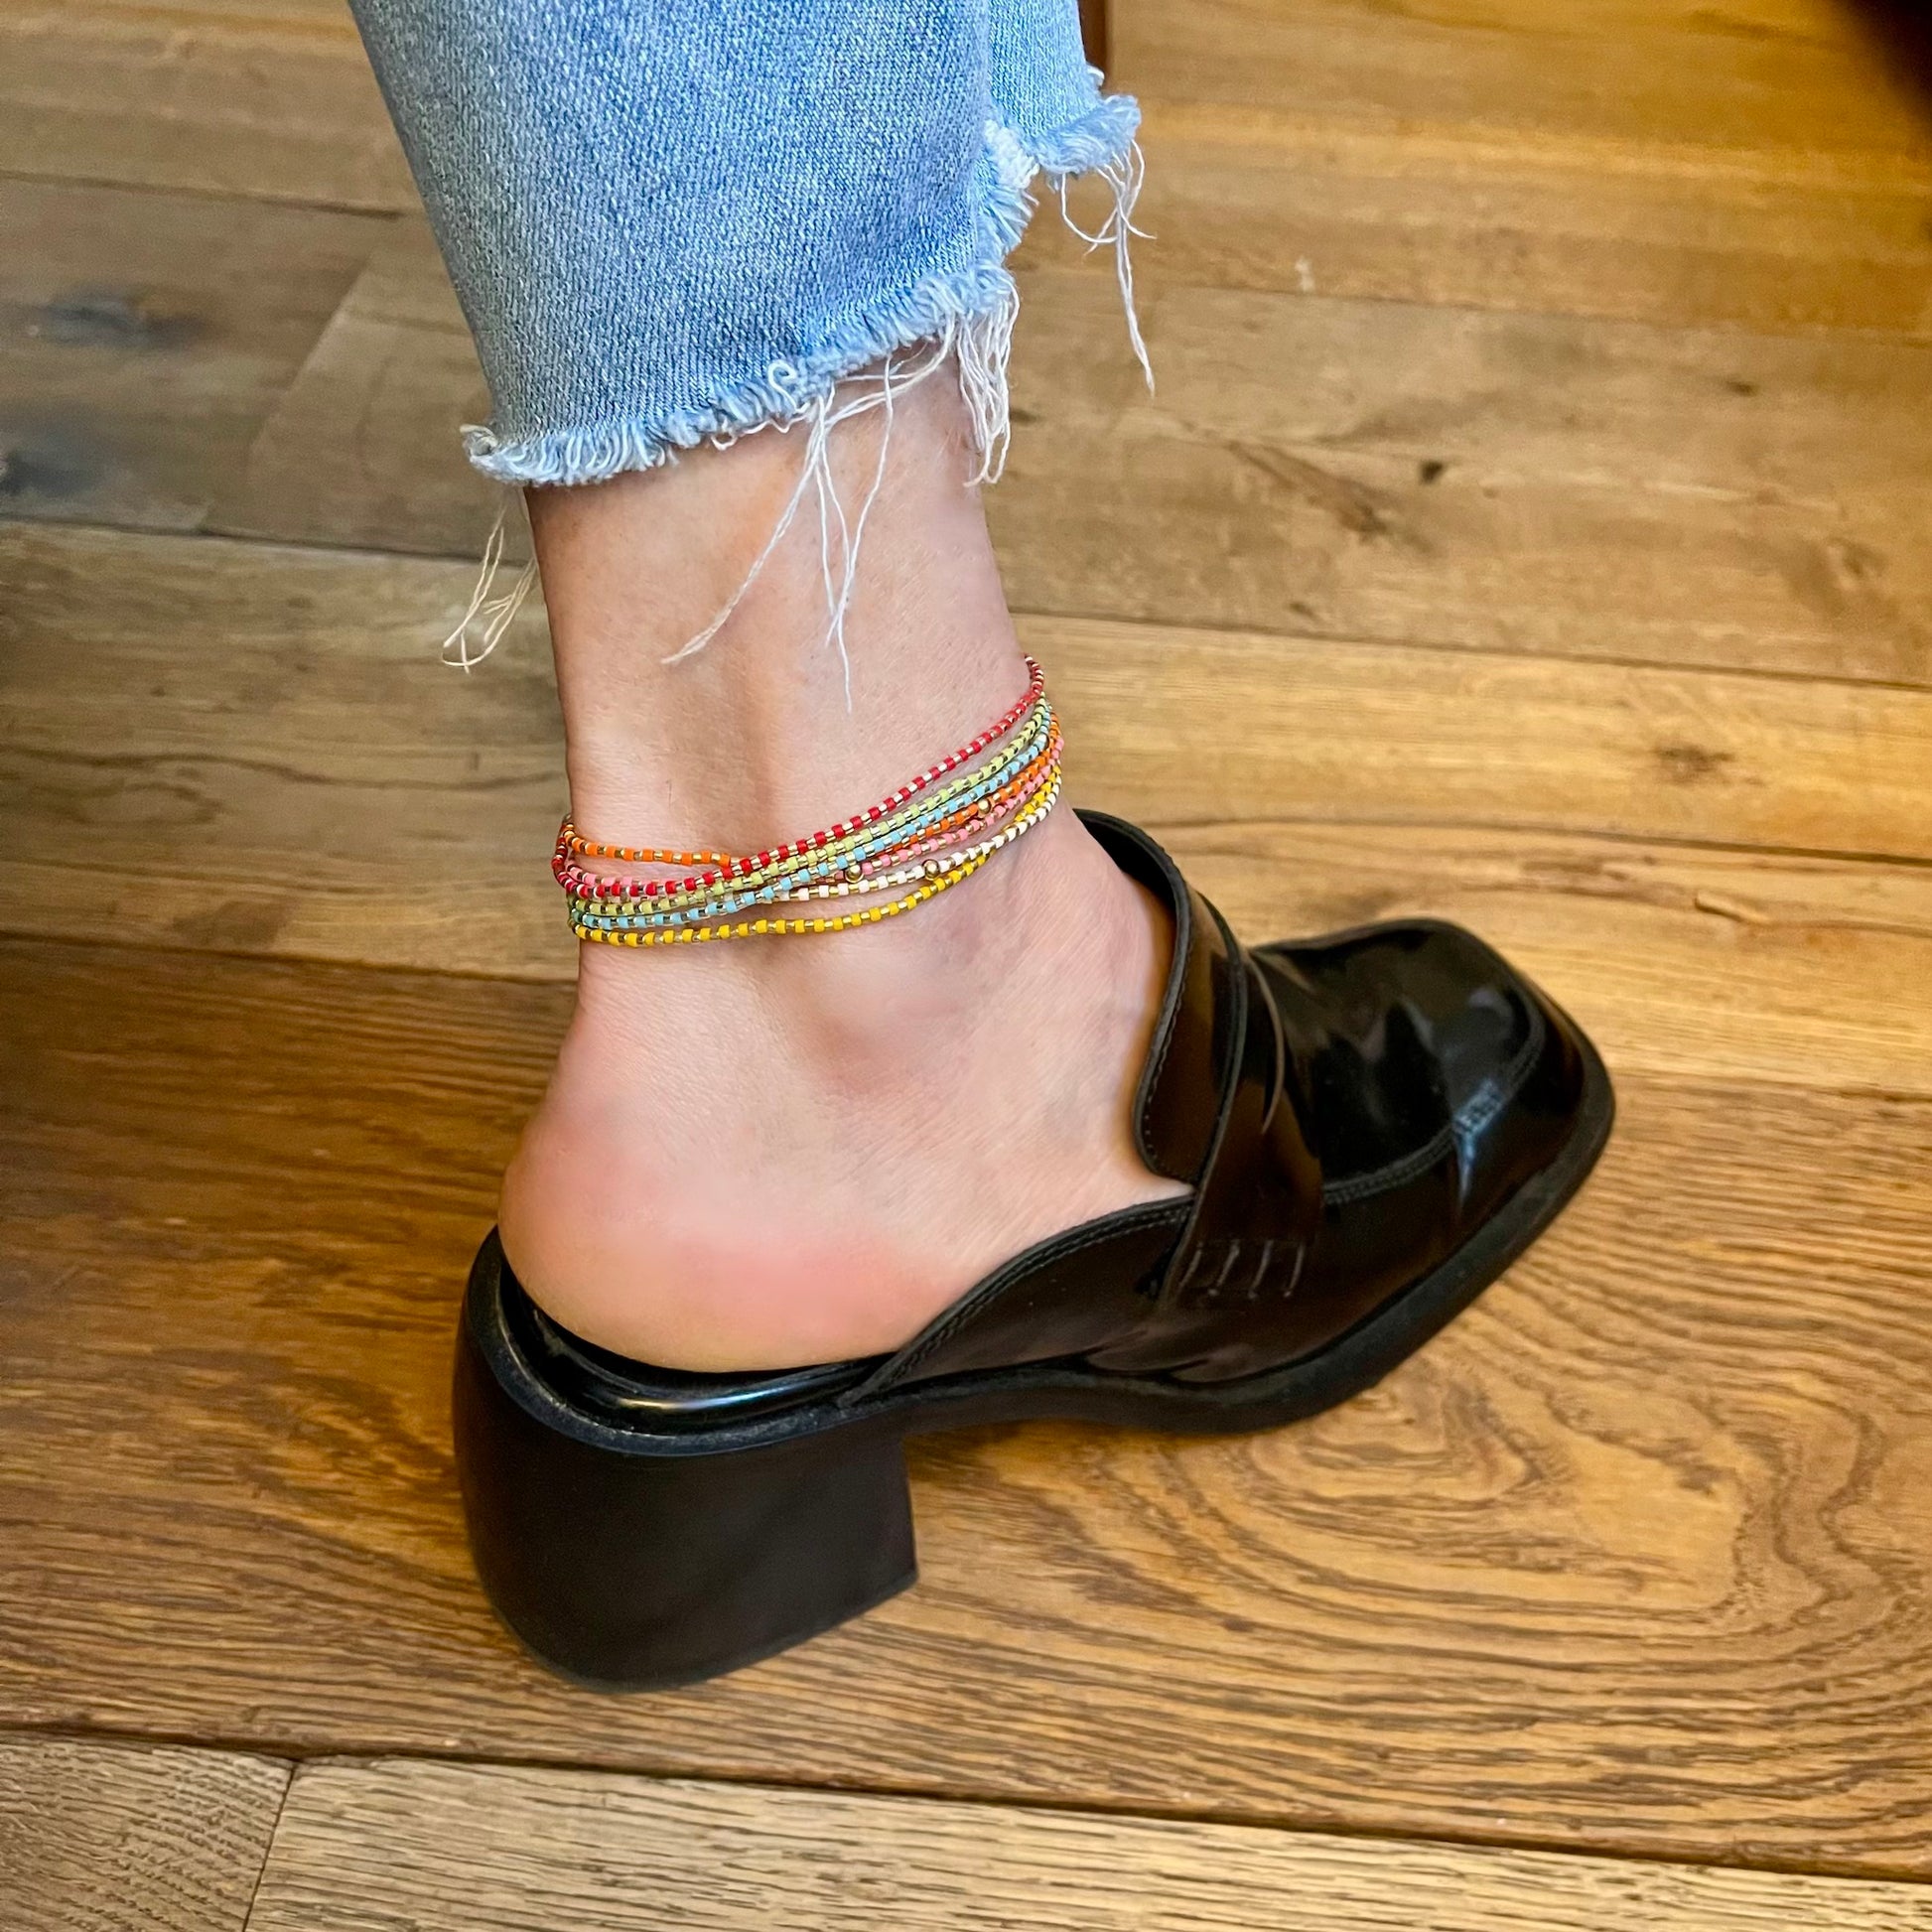 Dainty anklets on stretch cord. Fun, colorful skinny ankle bracelets in assorted colors.